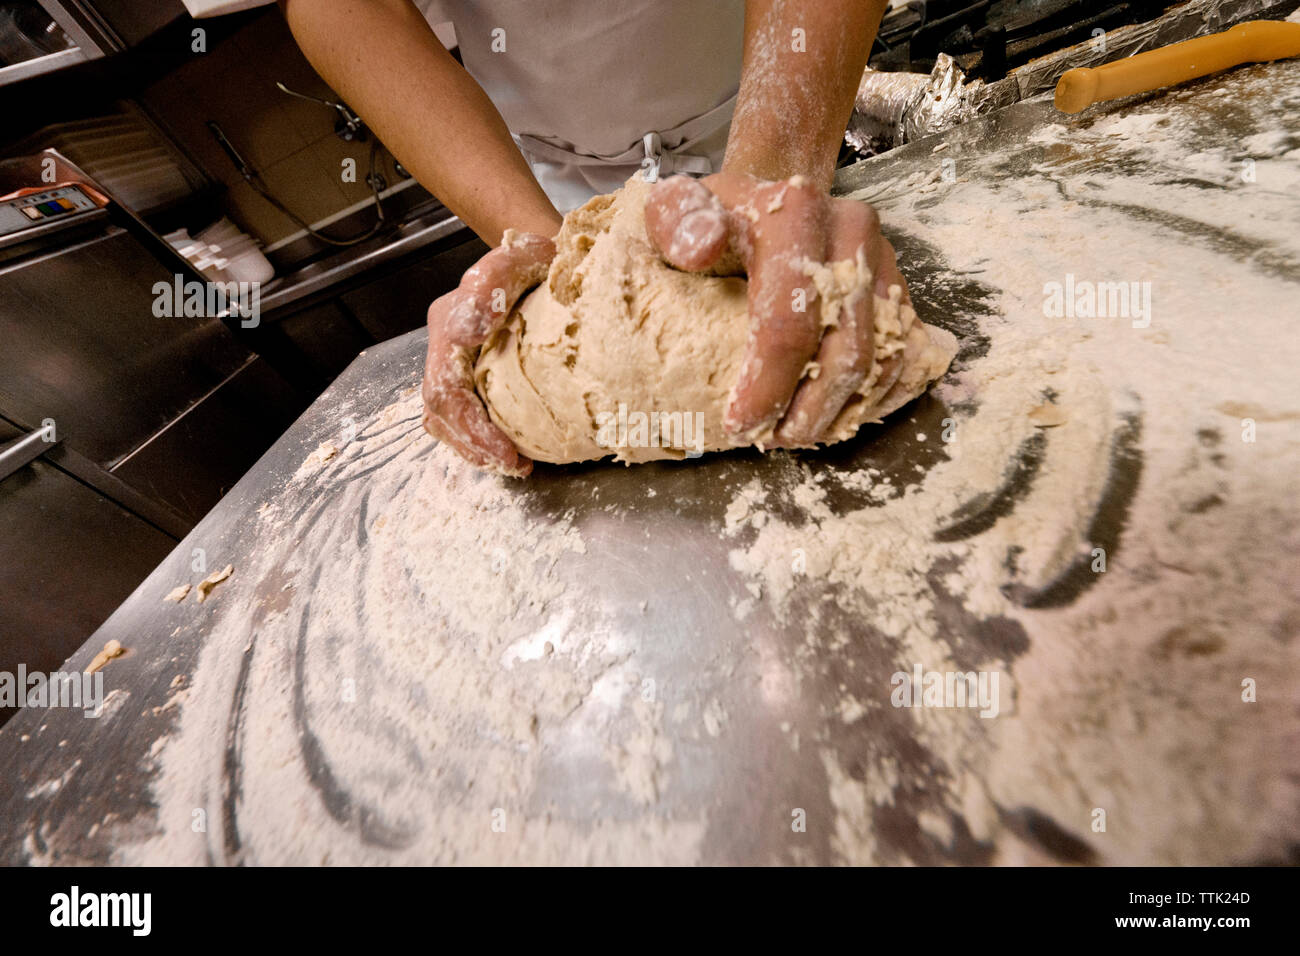 Midsection of chef kneading dough at commercial kitchen Stock Photo